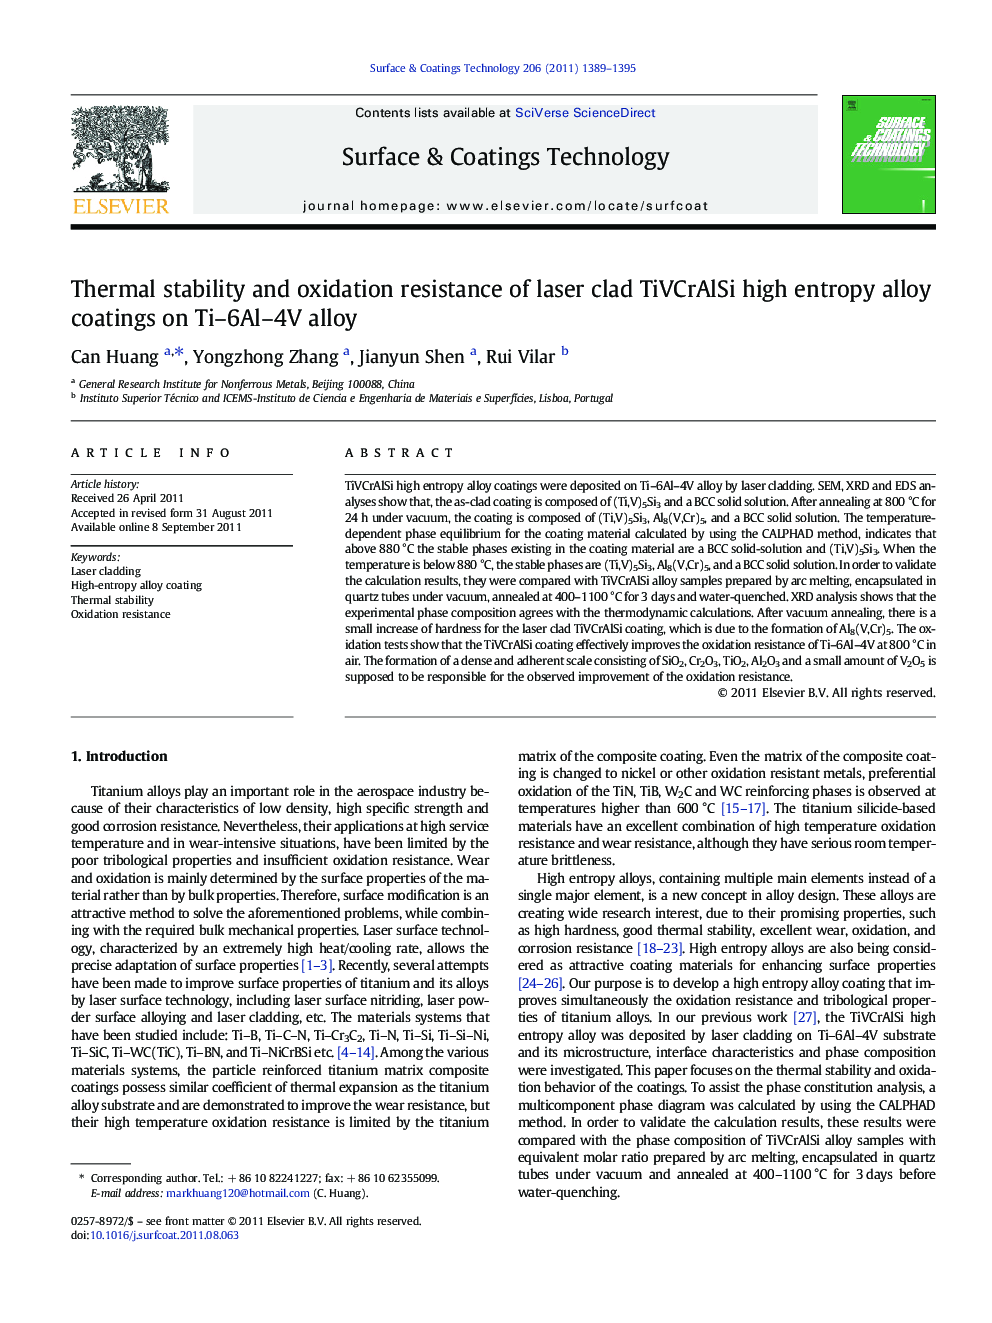 Thermal stability and oxidation resistance of laser clad TiVCrAlSi high entropy alloy coatings on Ti-6Al-4V alloy